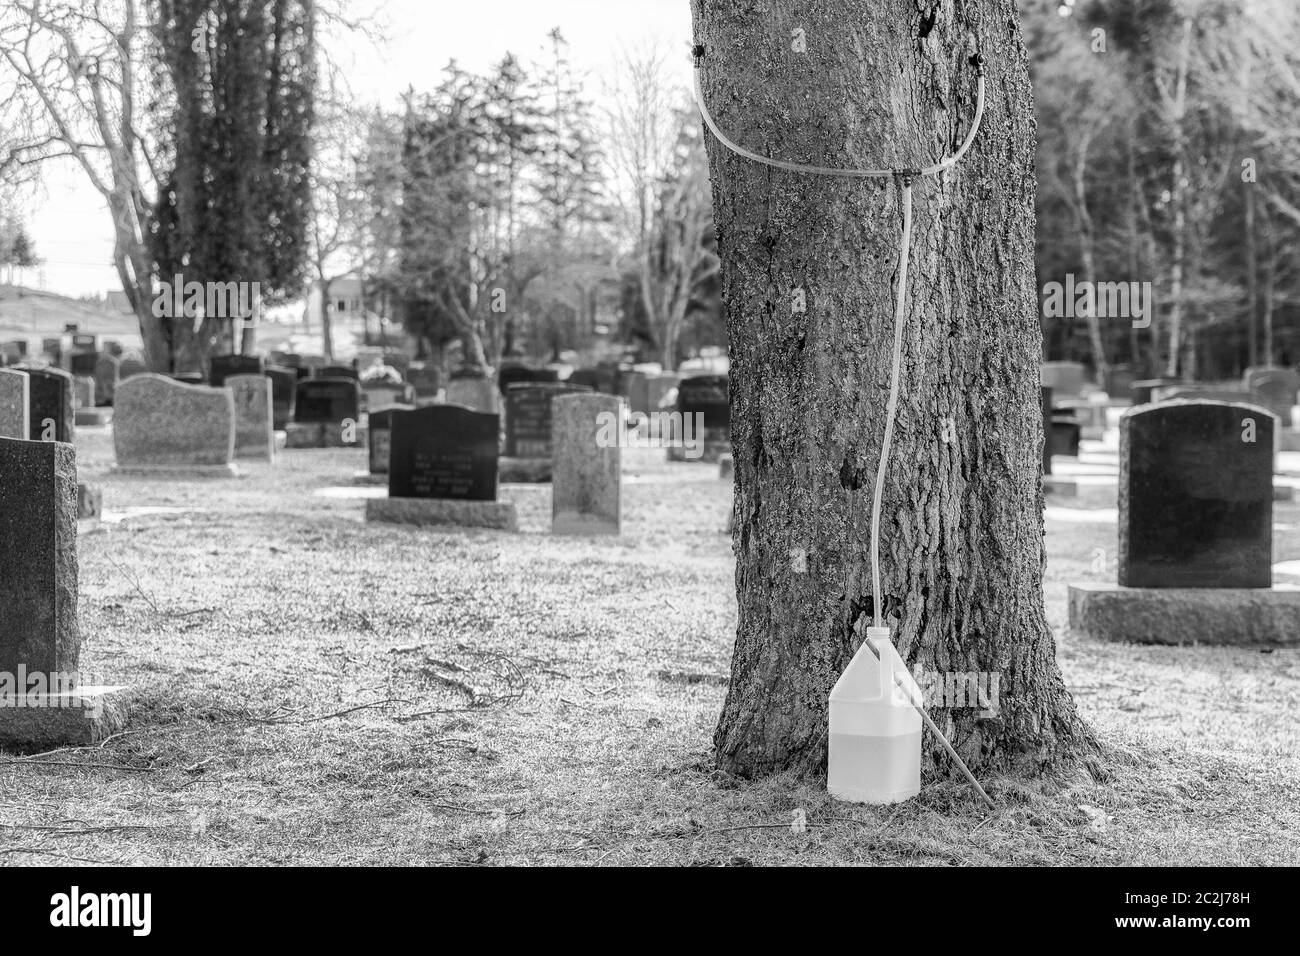 Harvesting maple sap in a grave yard. Sap flows from a hose attached to the tree into a plastic container. The sap will be boiled into maple syrup. Lo Stock Photo